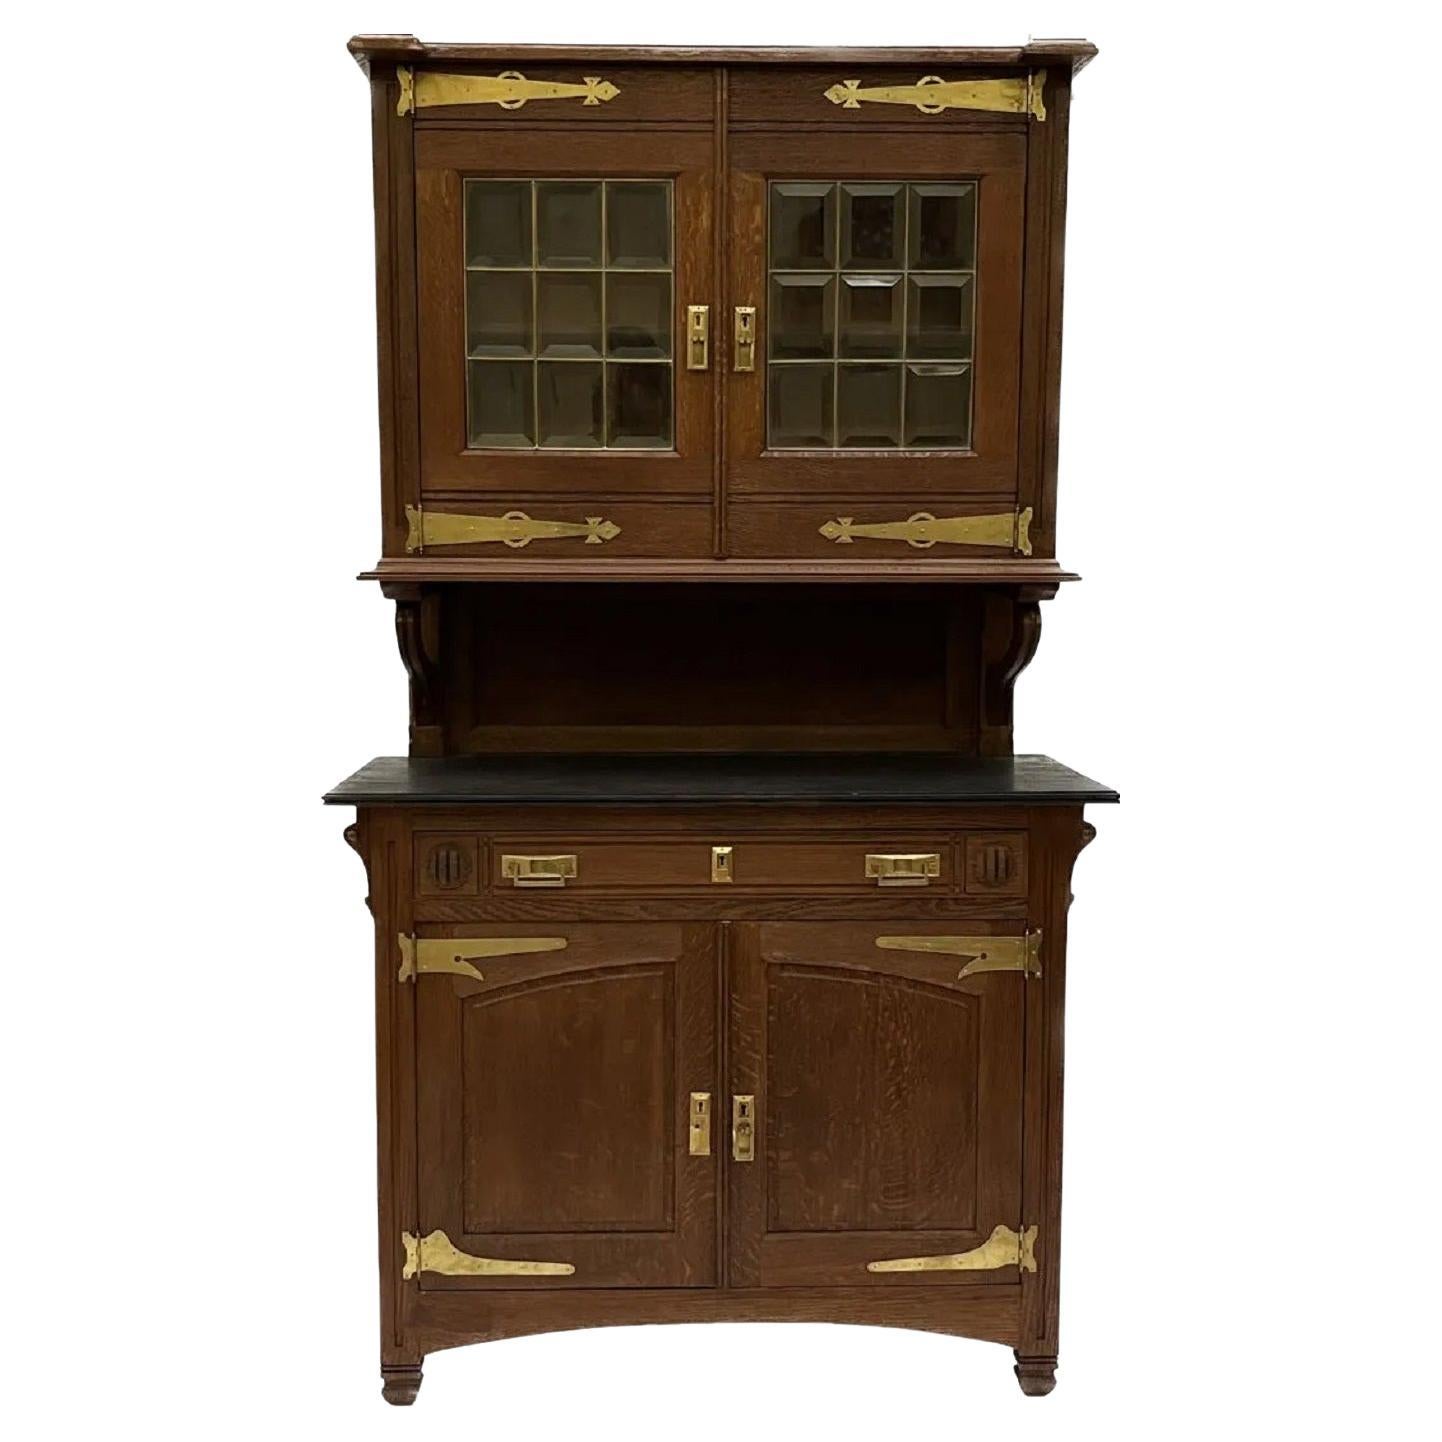 Art Nouveau Sideboard in Oak and Brass, Gustave Serrurier Bovy Style, circa 1900